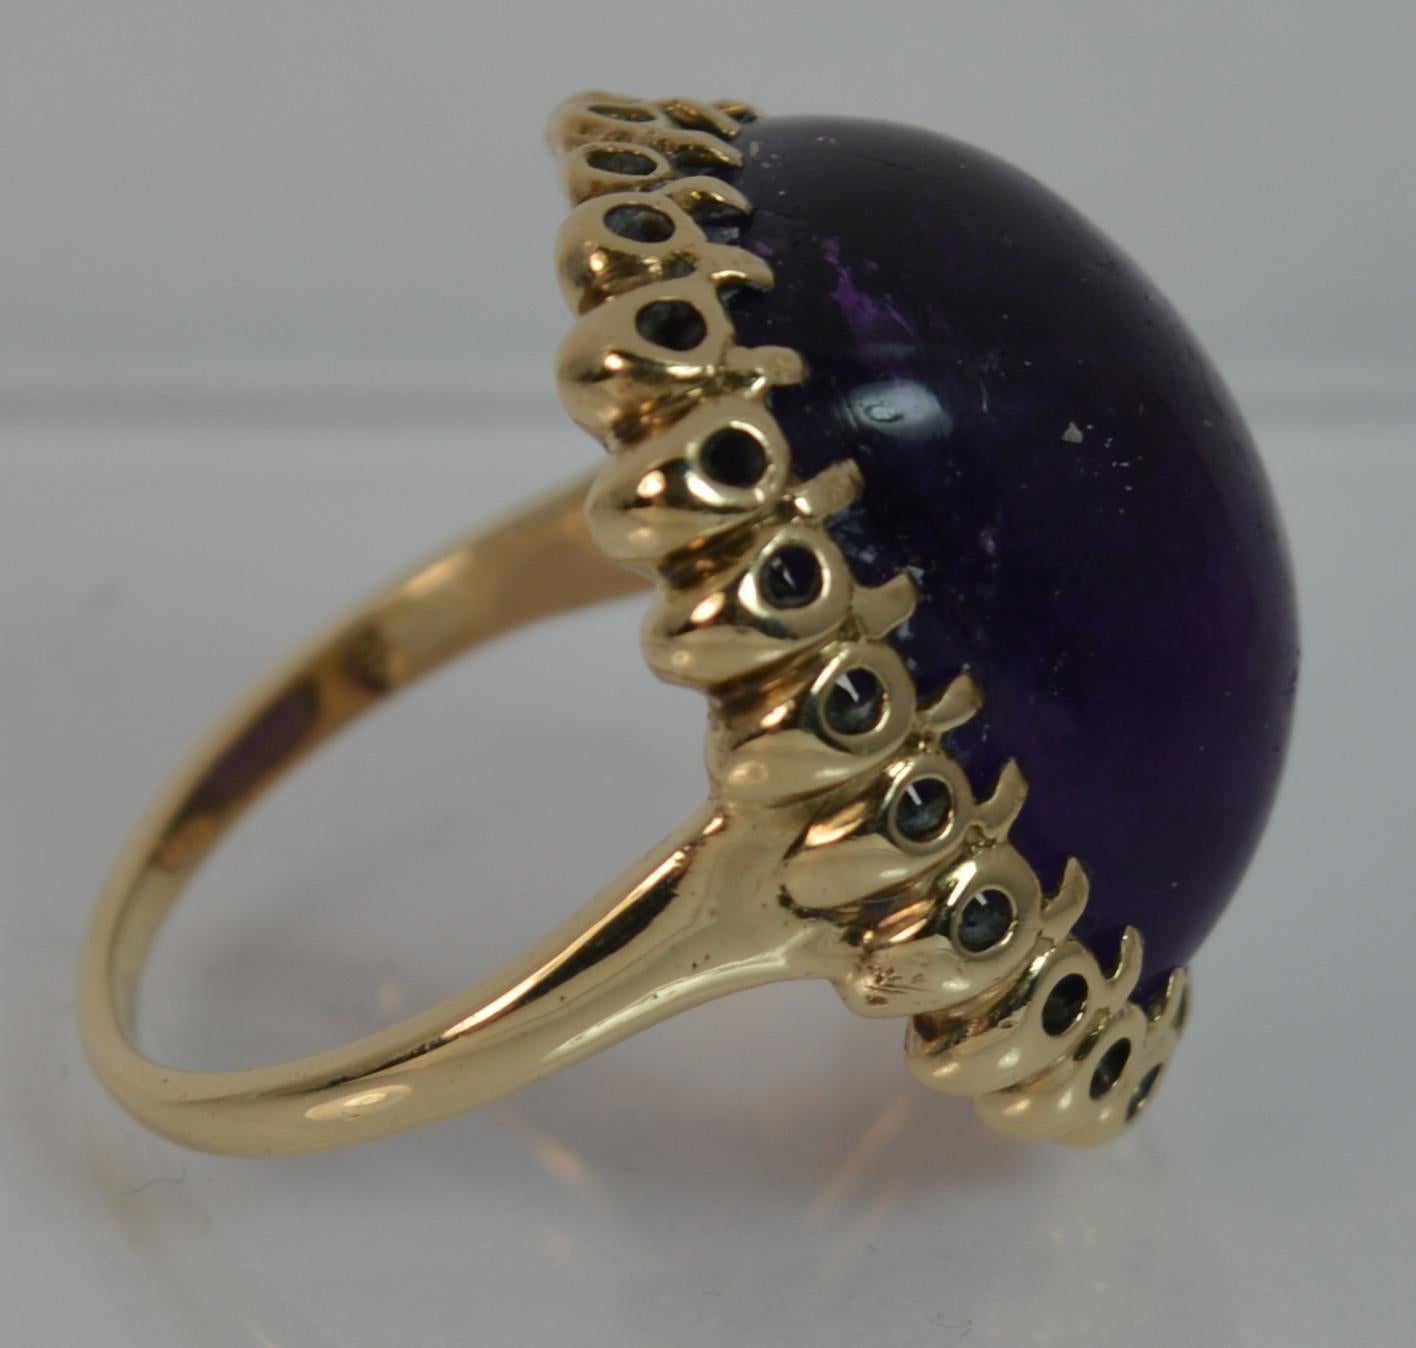 Huge Amethyst Cabochon Solitaire and Yellow Gold Ring 7